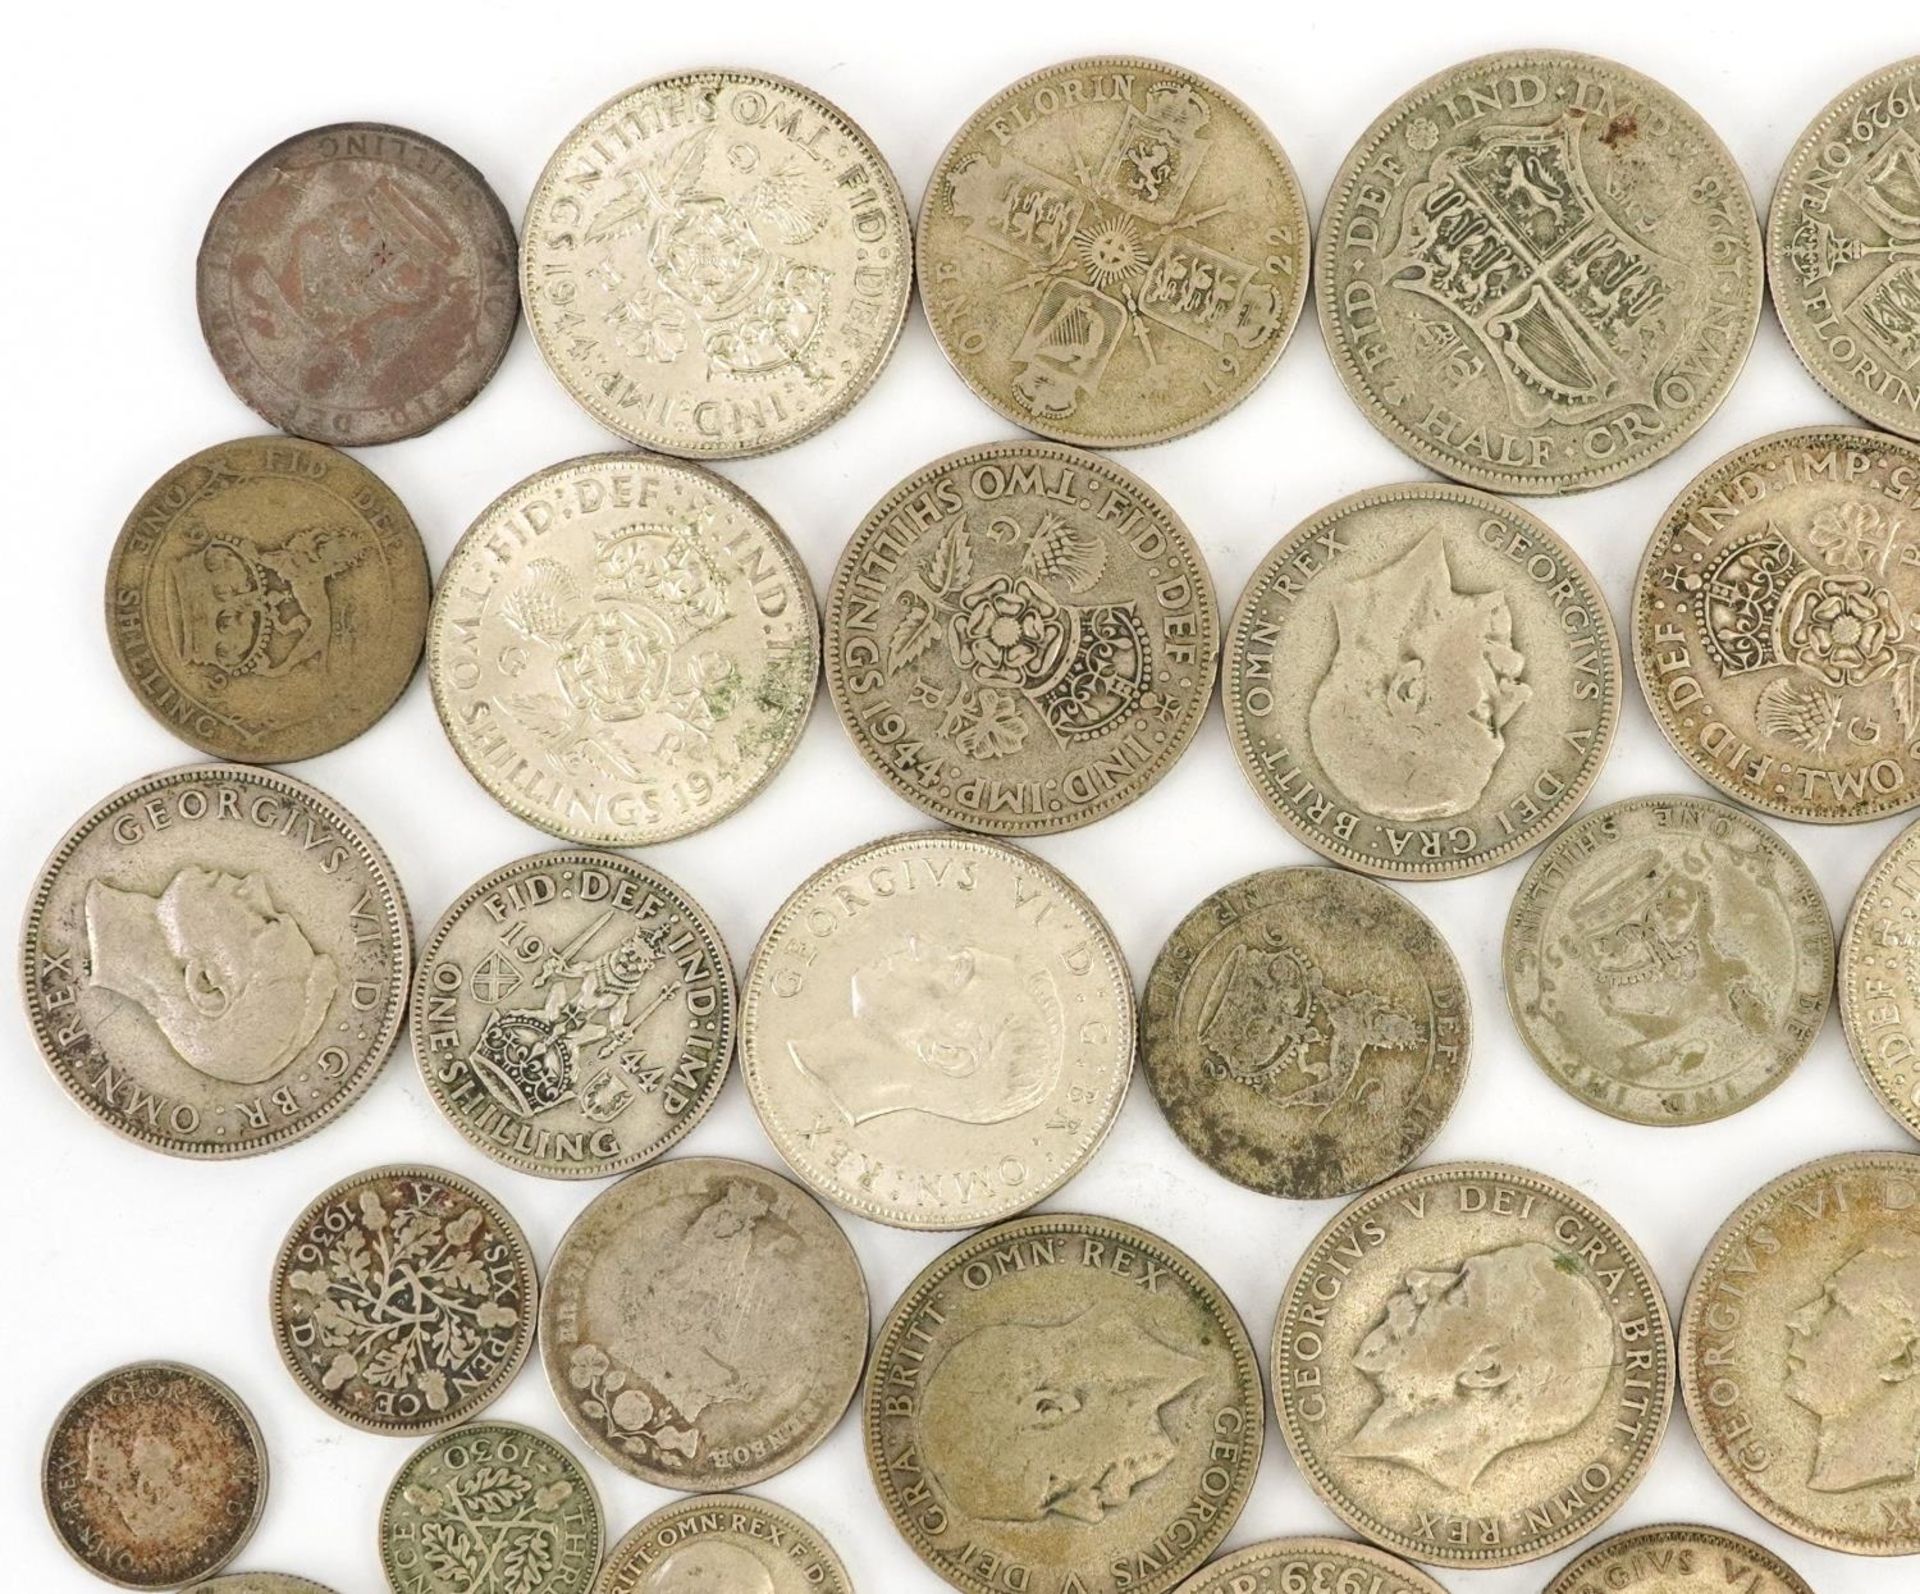 British pre decimal, pre 1947 coinage including half crowns and two shillings, 400g - Image 2 of 5